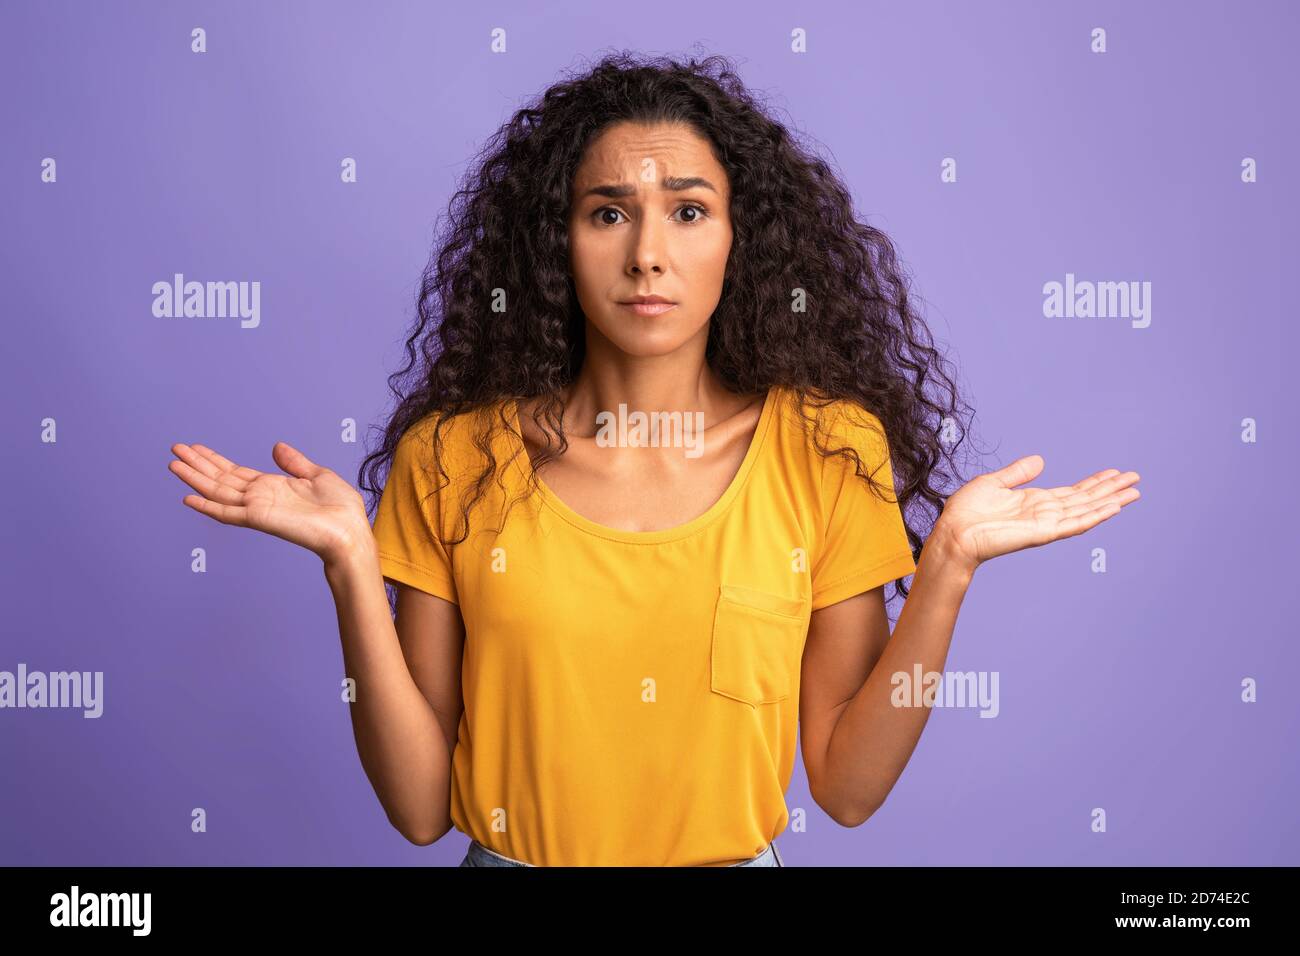 I Don't Know. Concerned young woman shrugging shoulders with spreaded hands Stock Photo